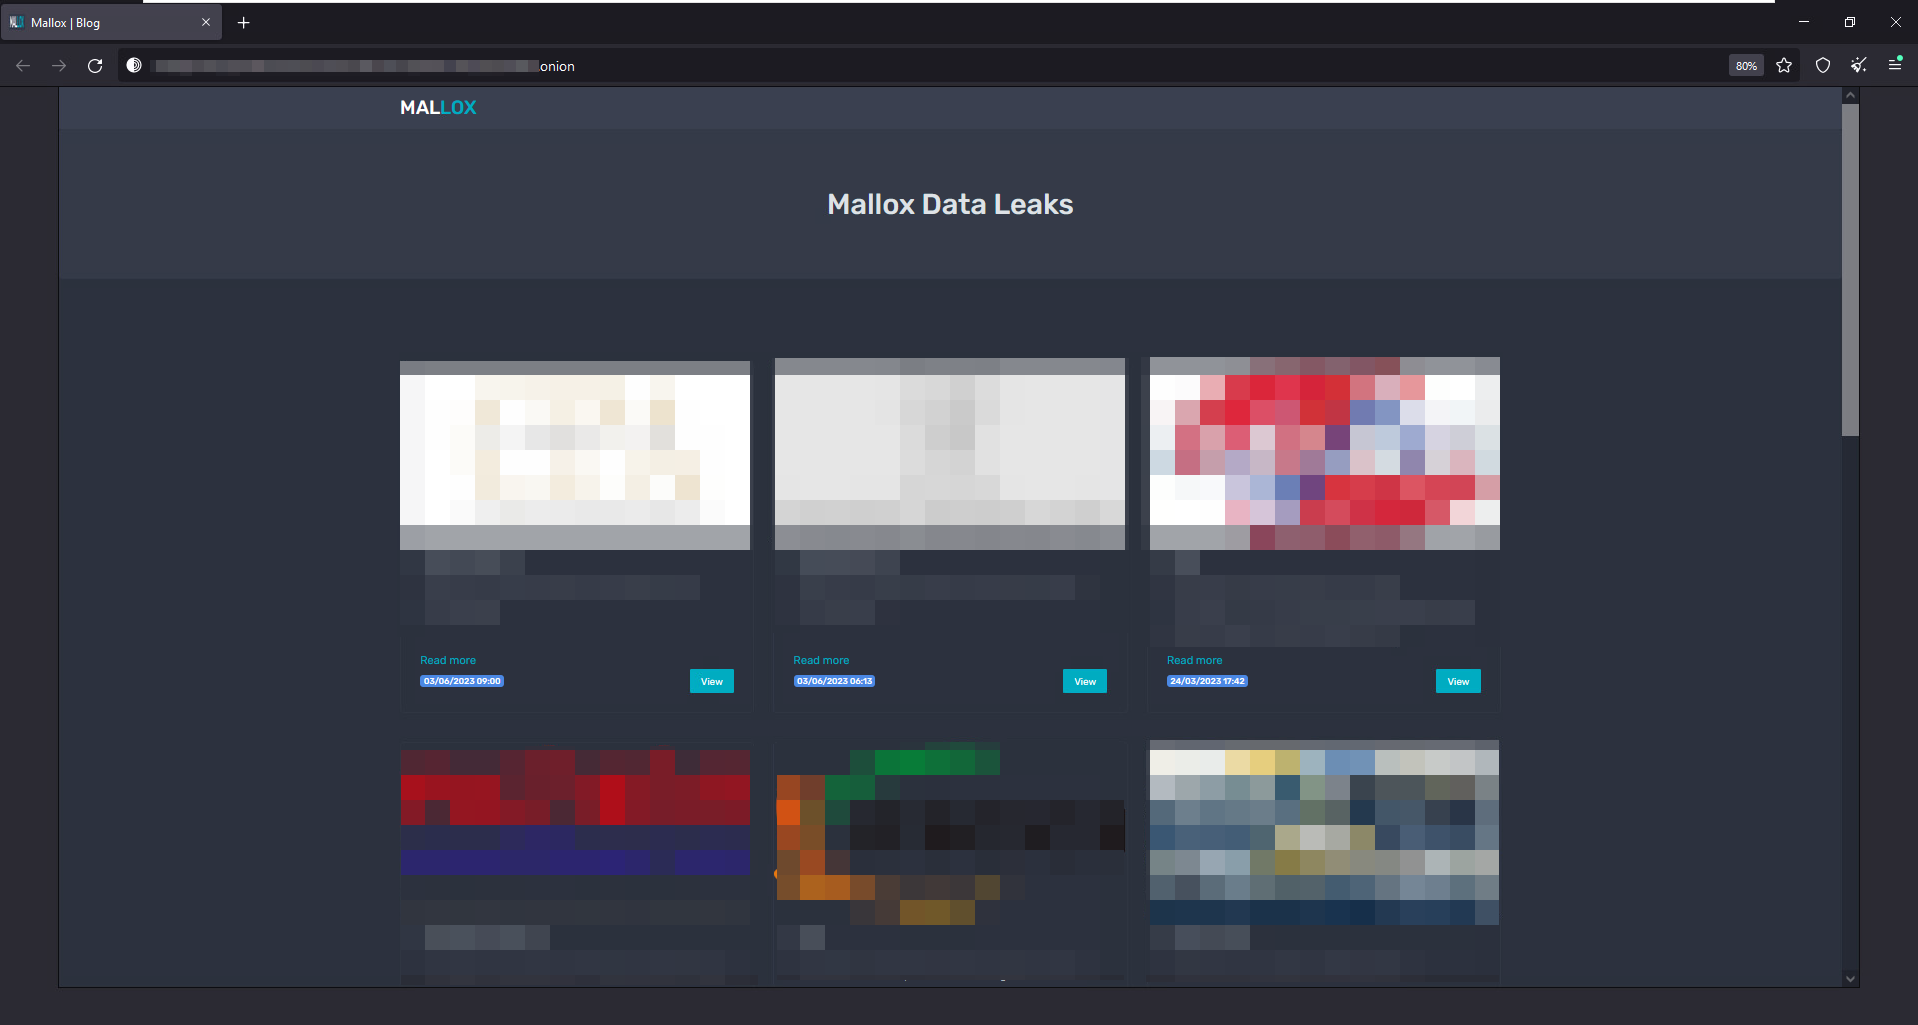 Image 1 is a shot of the Mallox ransomware gang website on the Tor browser. The website is titled Mallox Data Leaks. Six thumbnails have been blurred. These are the victims that have been posted by the gang.